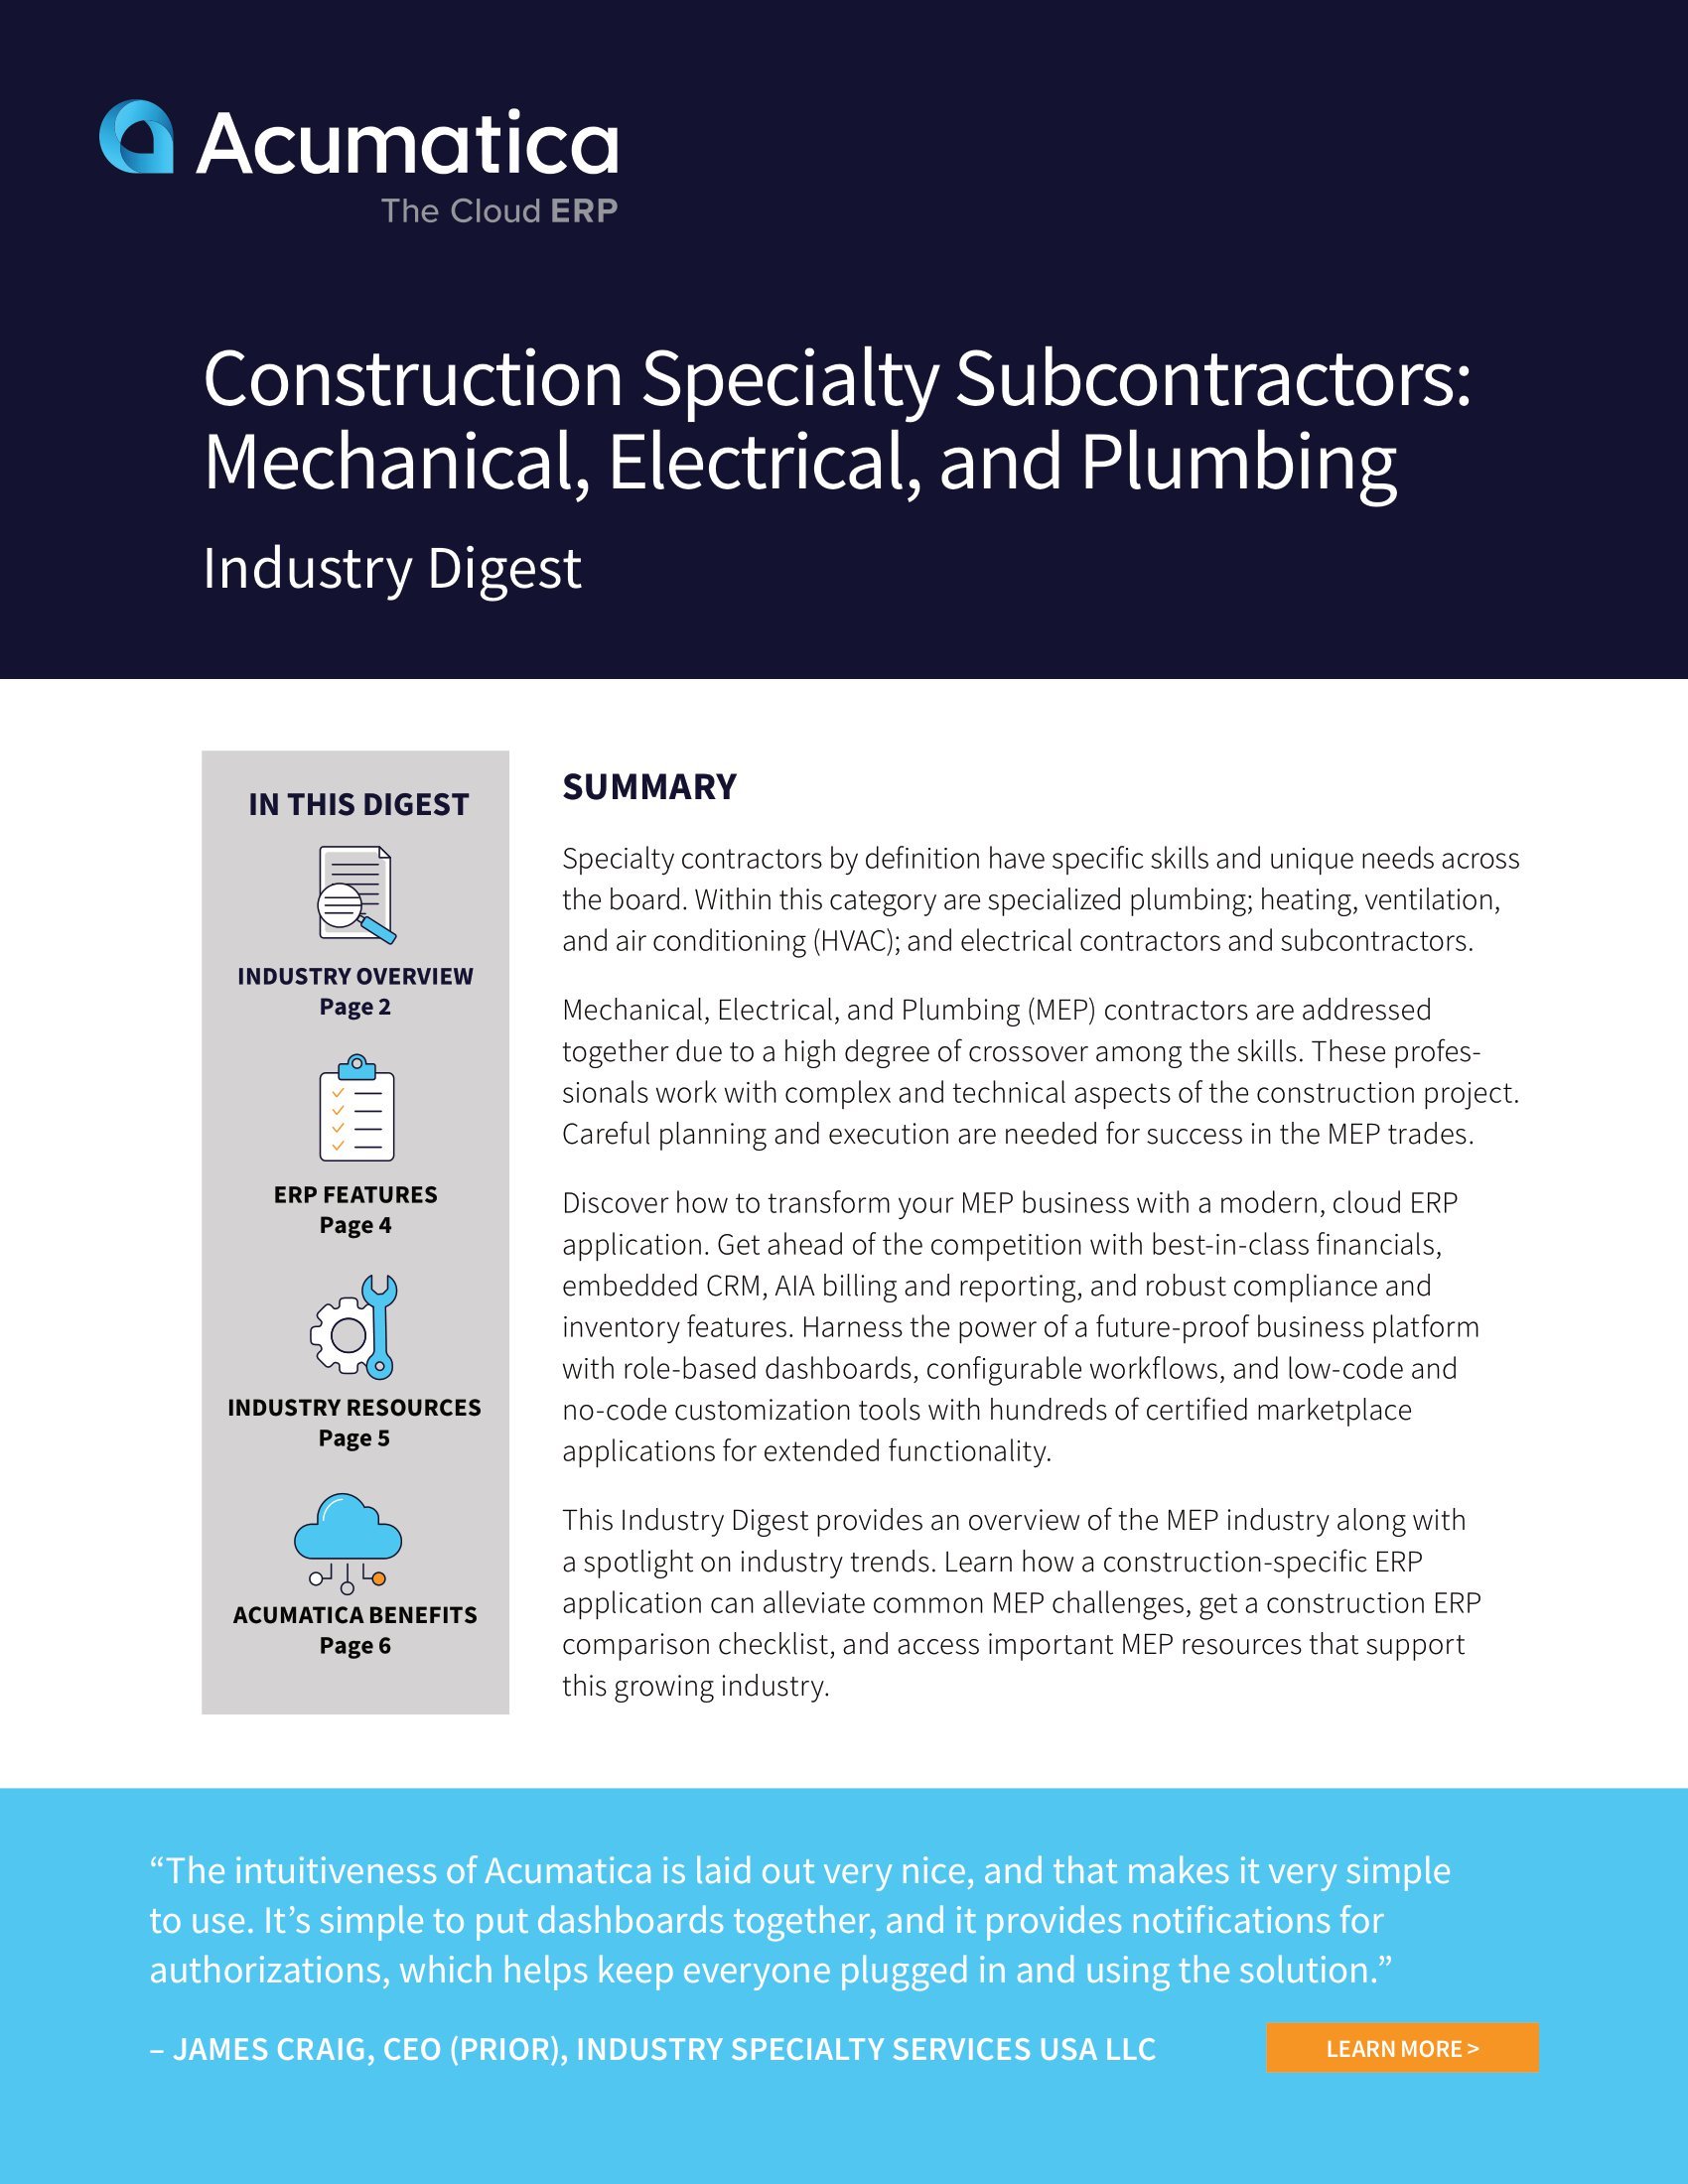 Why Mechanical, Electrical, and Plumbing (MEP) Specialty Contractors Should Implement Acumatica Construction Edition